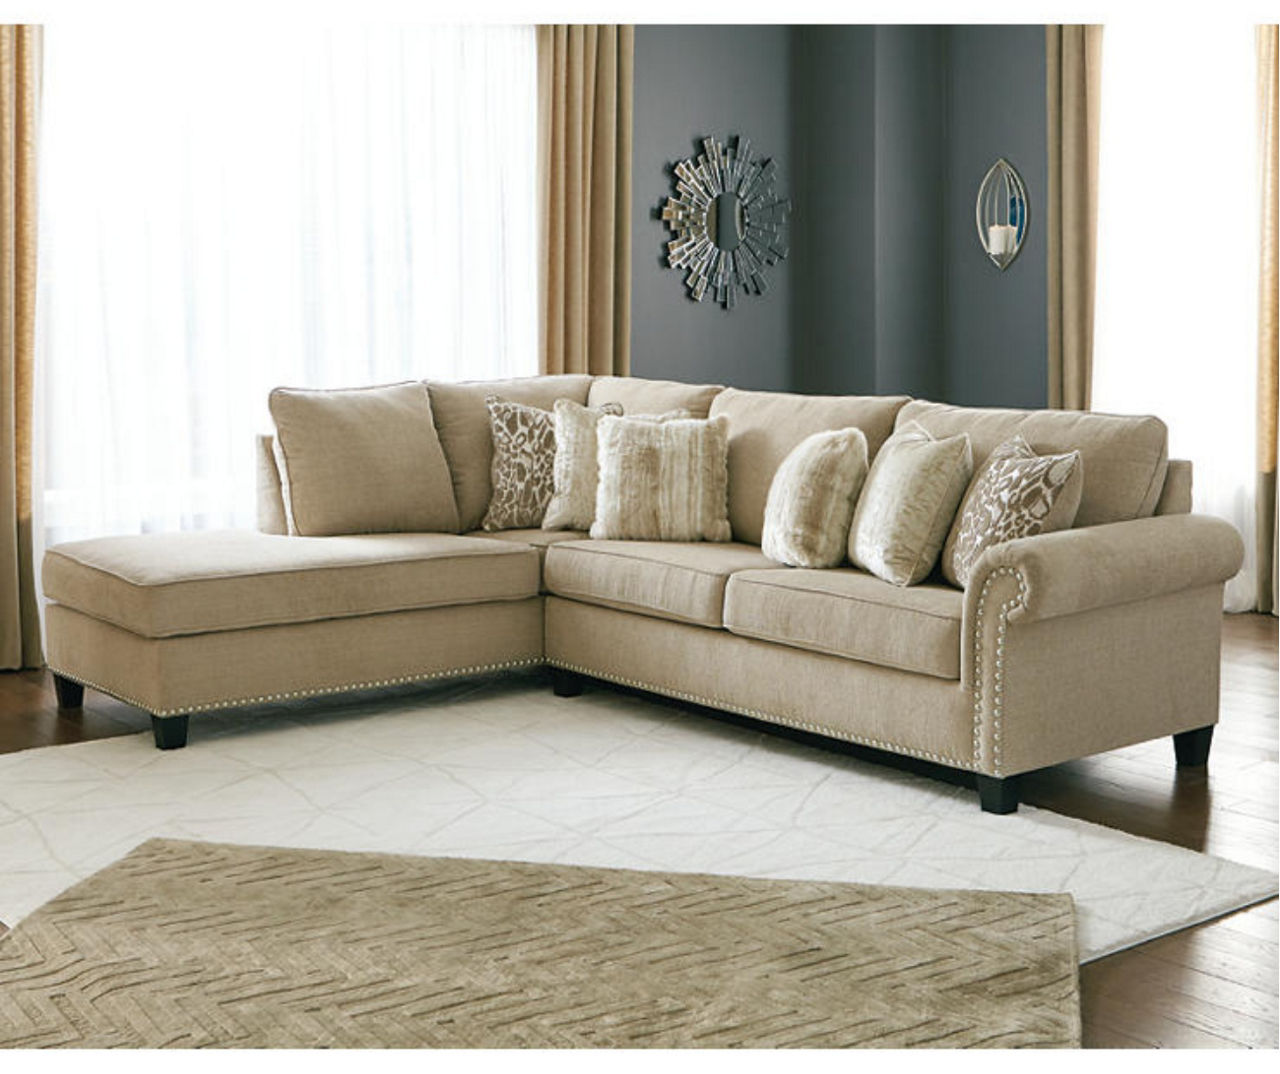 Signature Design By Ashley Dovemont Sectional with Left-Facing Chaise